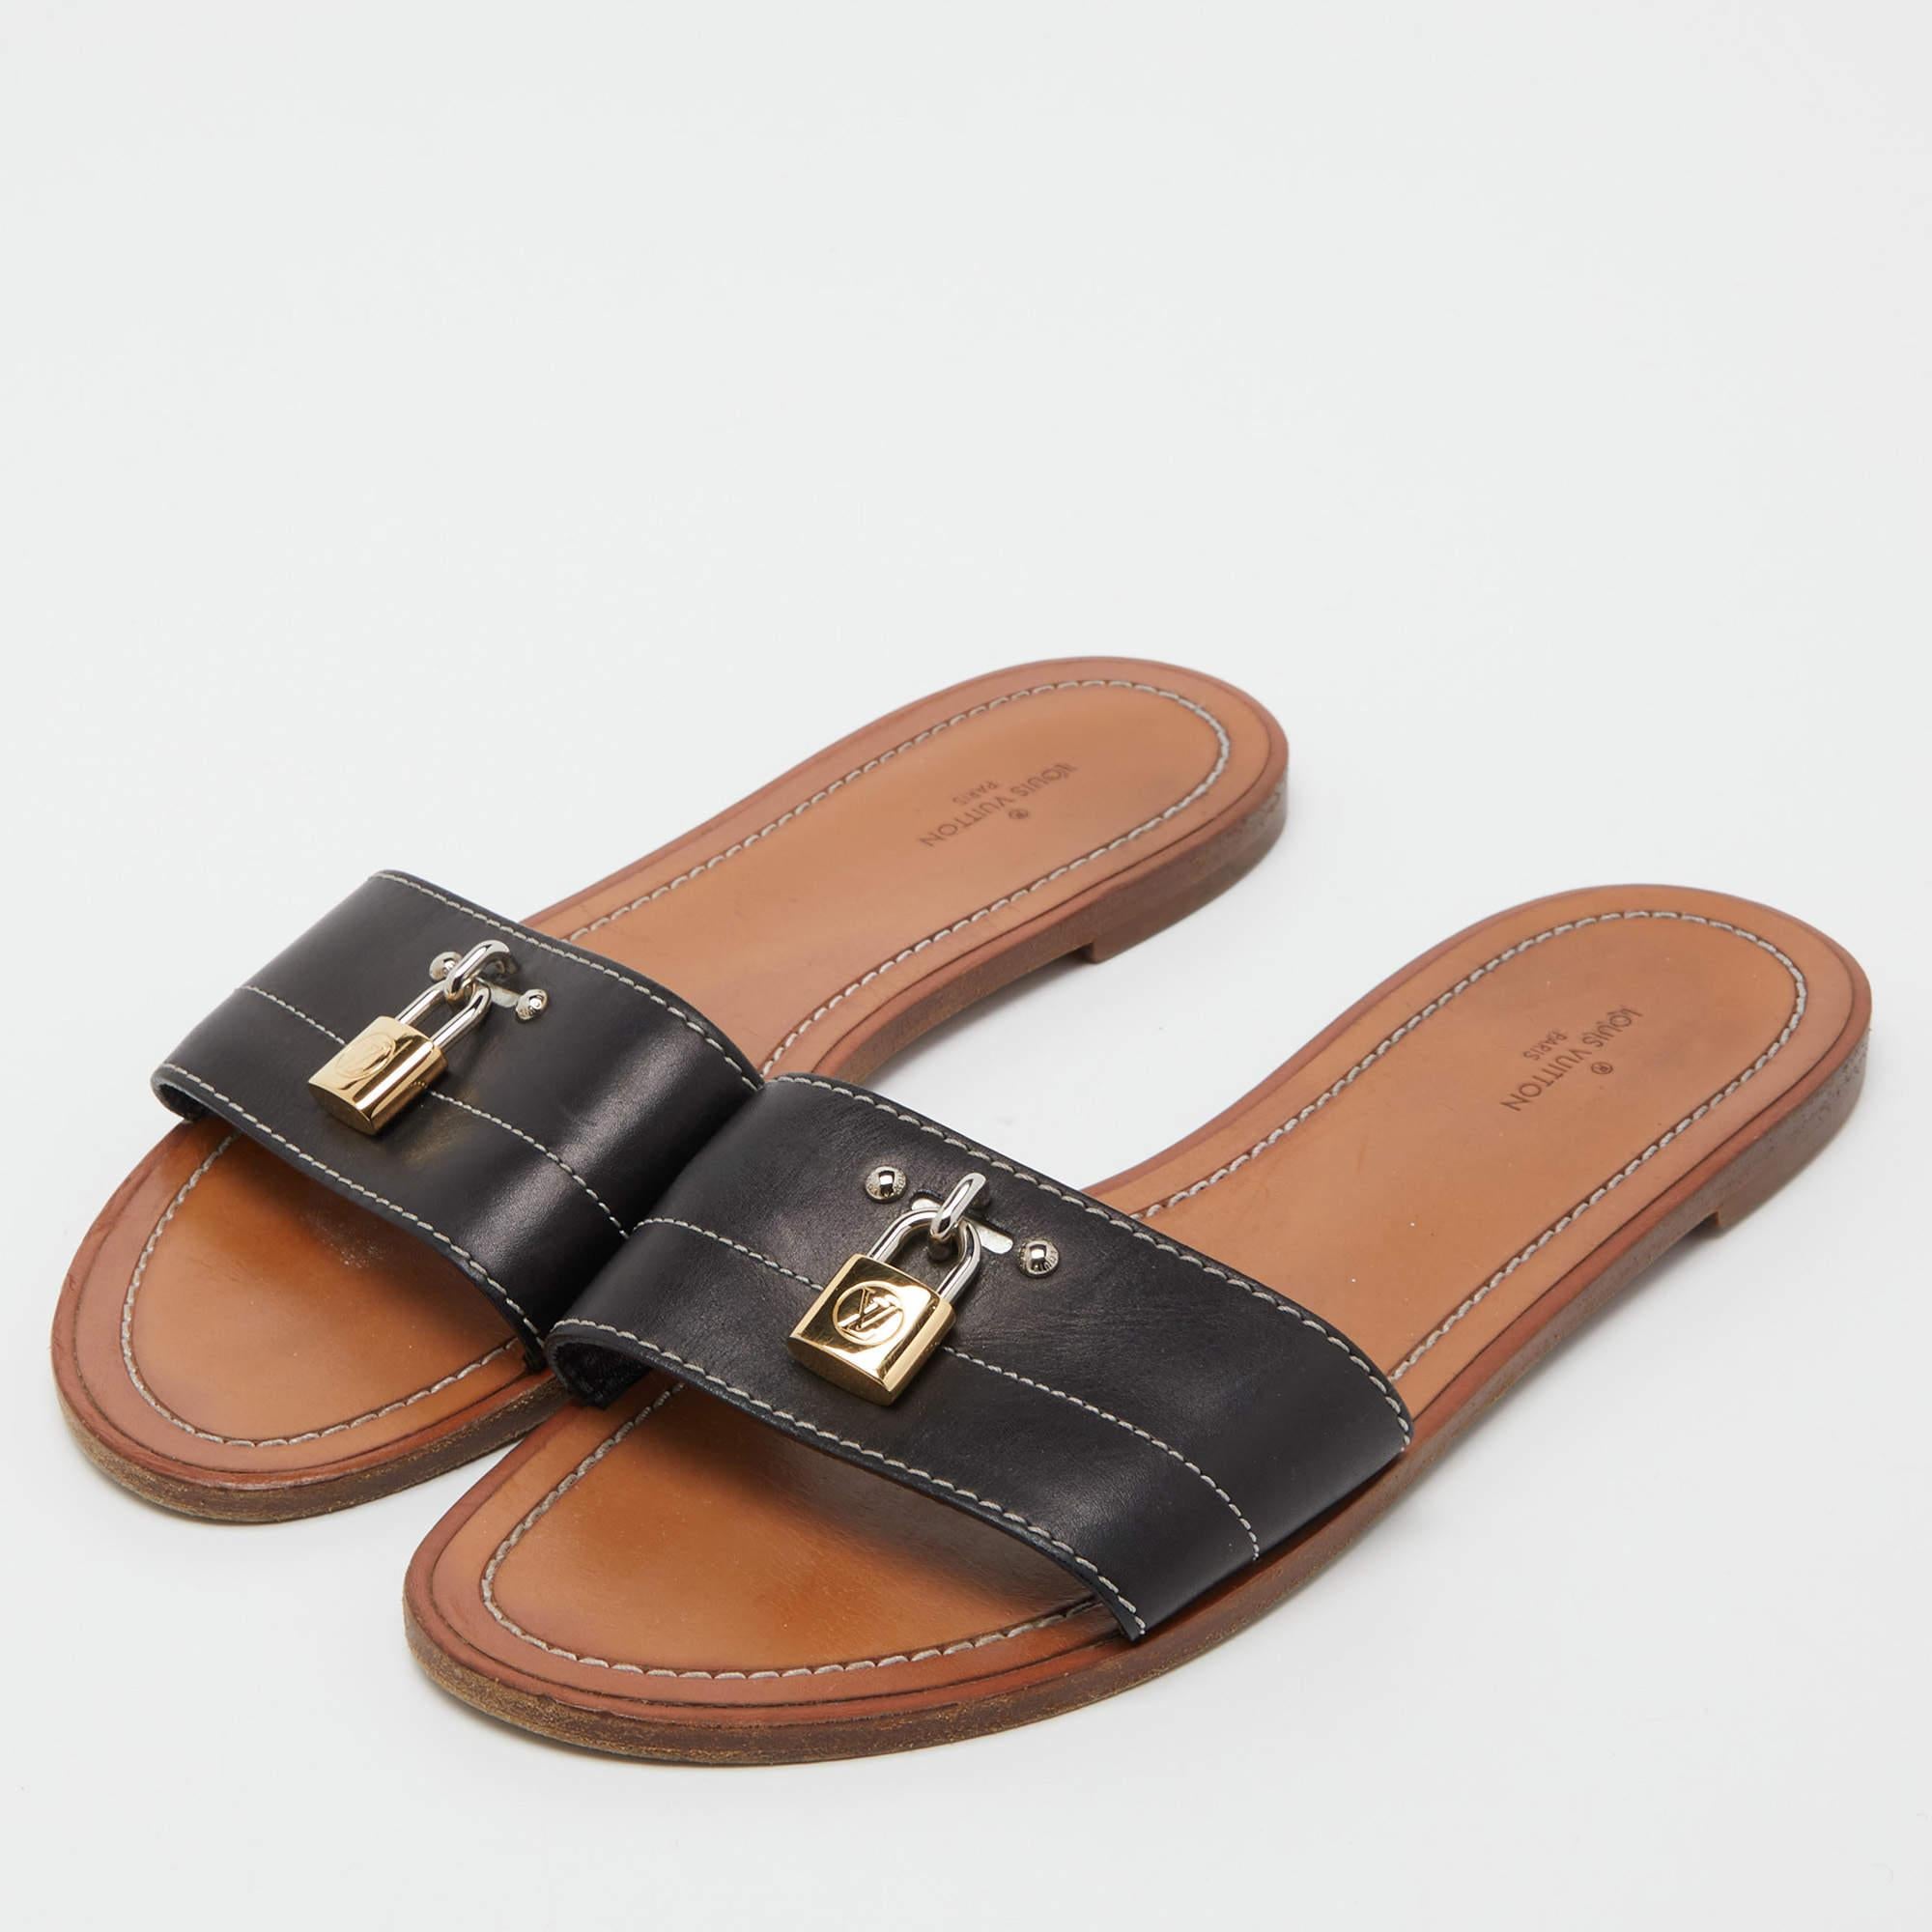 Enhance your casual looks with a touch of high style with these designer slides. Rendered in quality material with a lovely hue adorning its expanse, this pair is a must-have!

